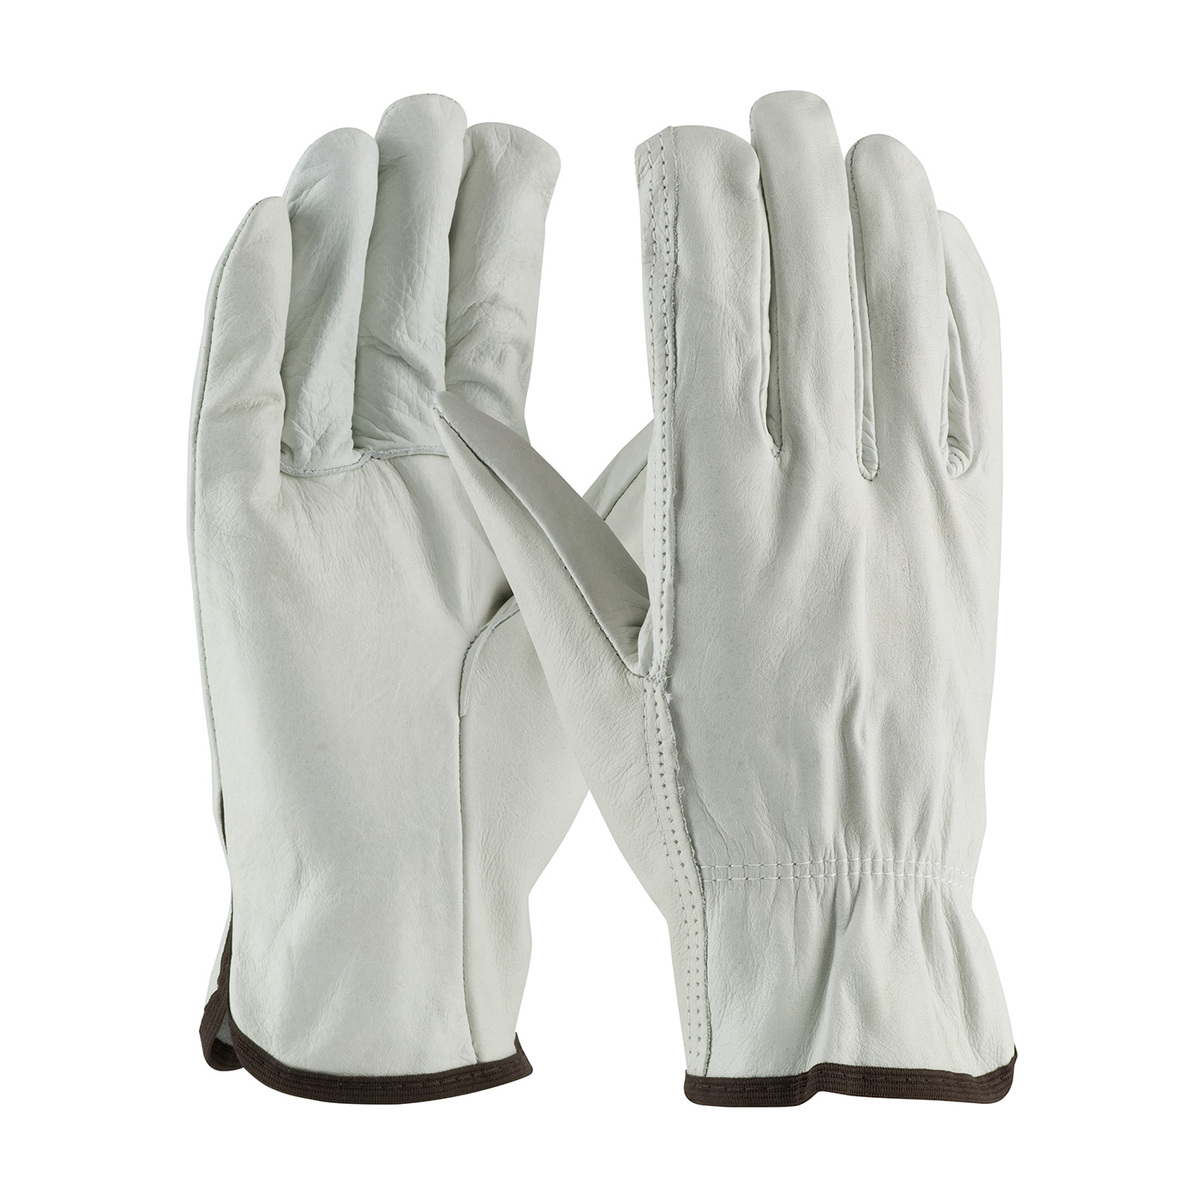 PIP® Natural Top Grain Cowhide Unlined Drivers Gloves